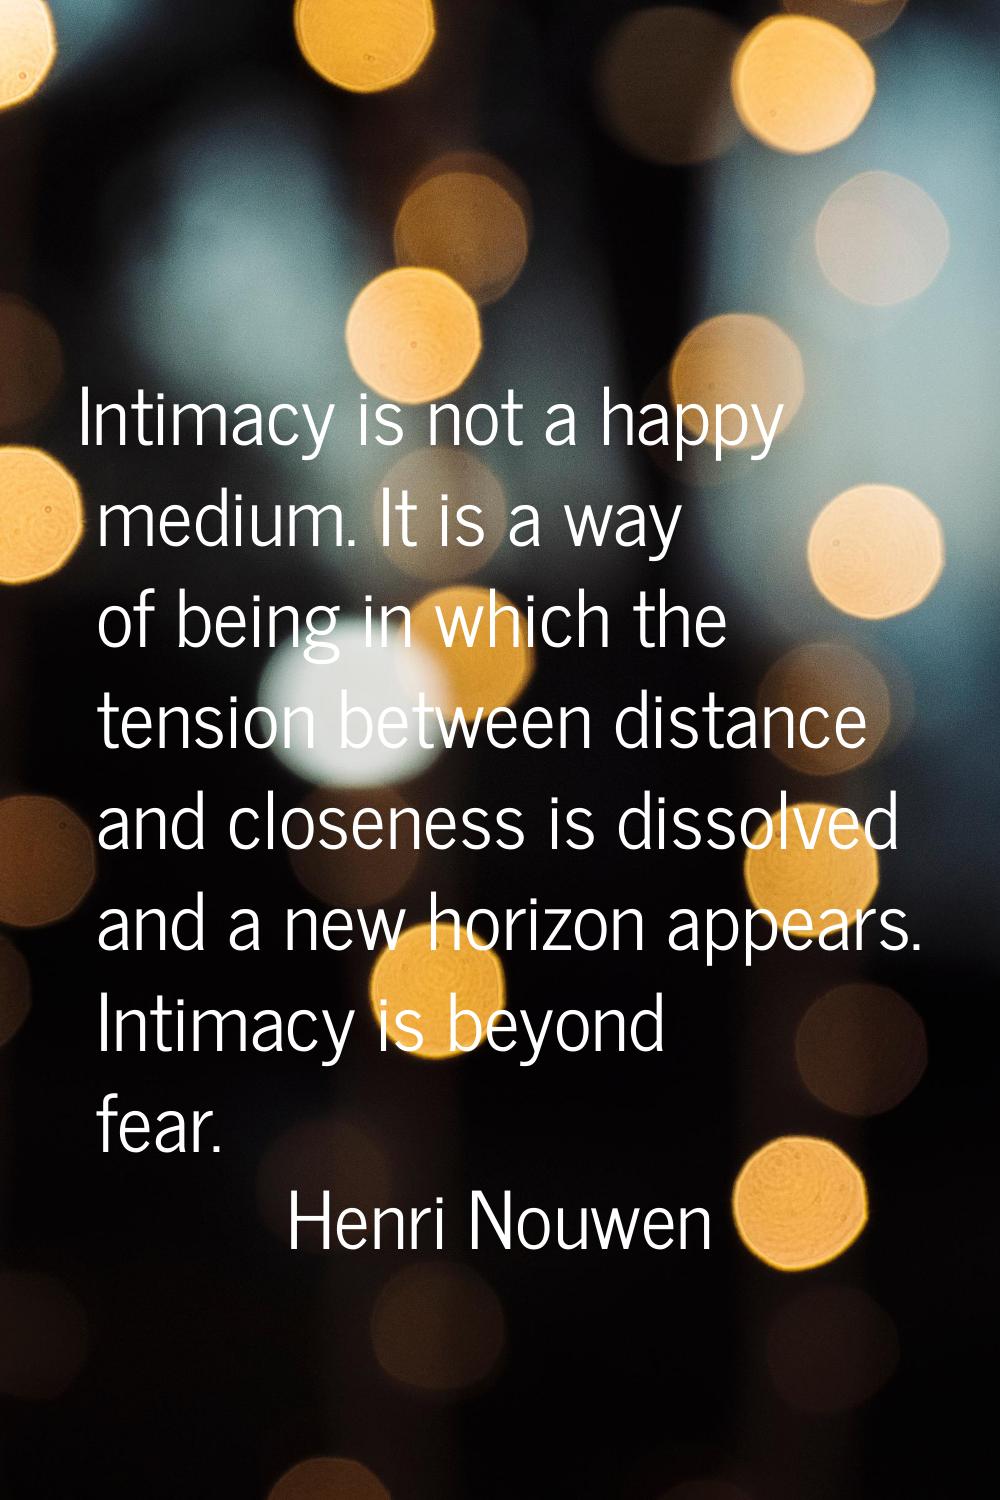 Intimacy is not a happy medium. It is a way of being in which the tension between distance and clos